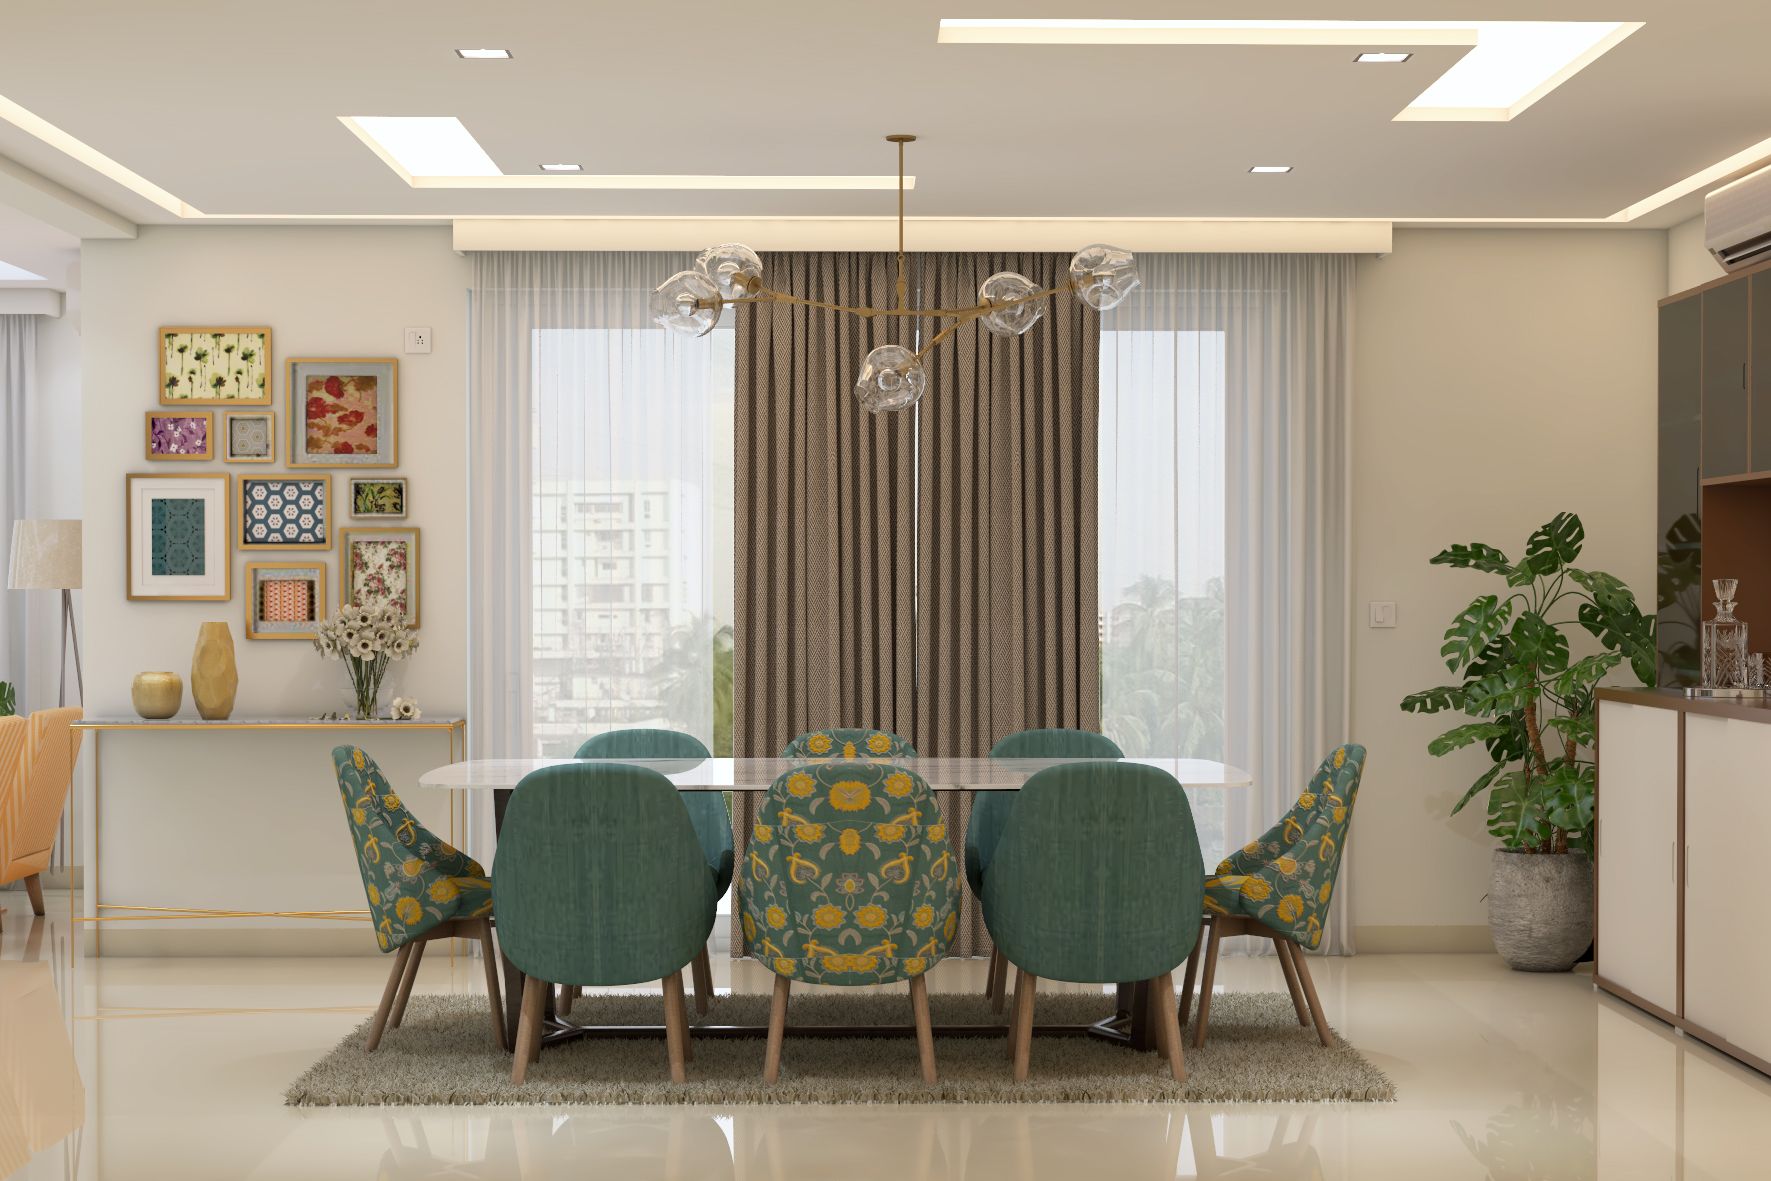 Contemporary Dining Room Design With Printed Dining Chairs